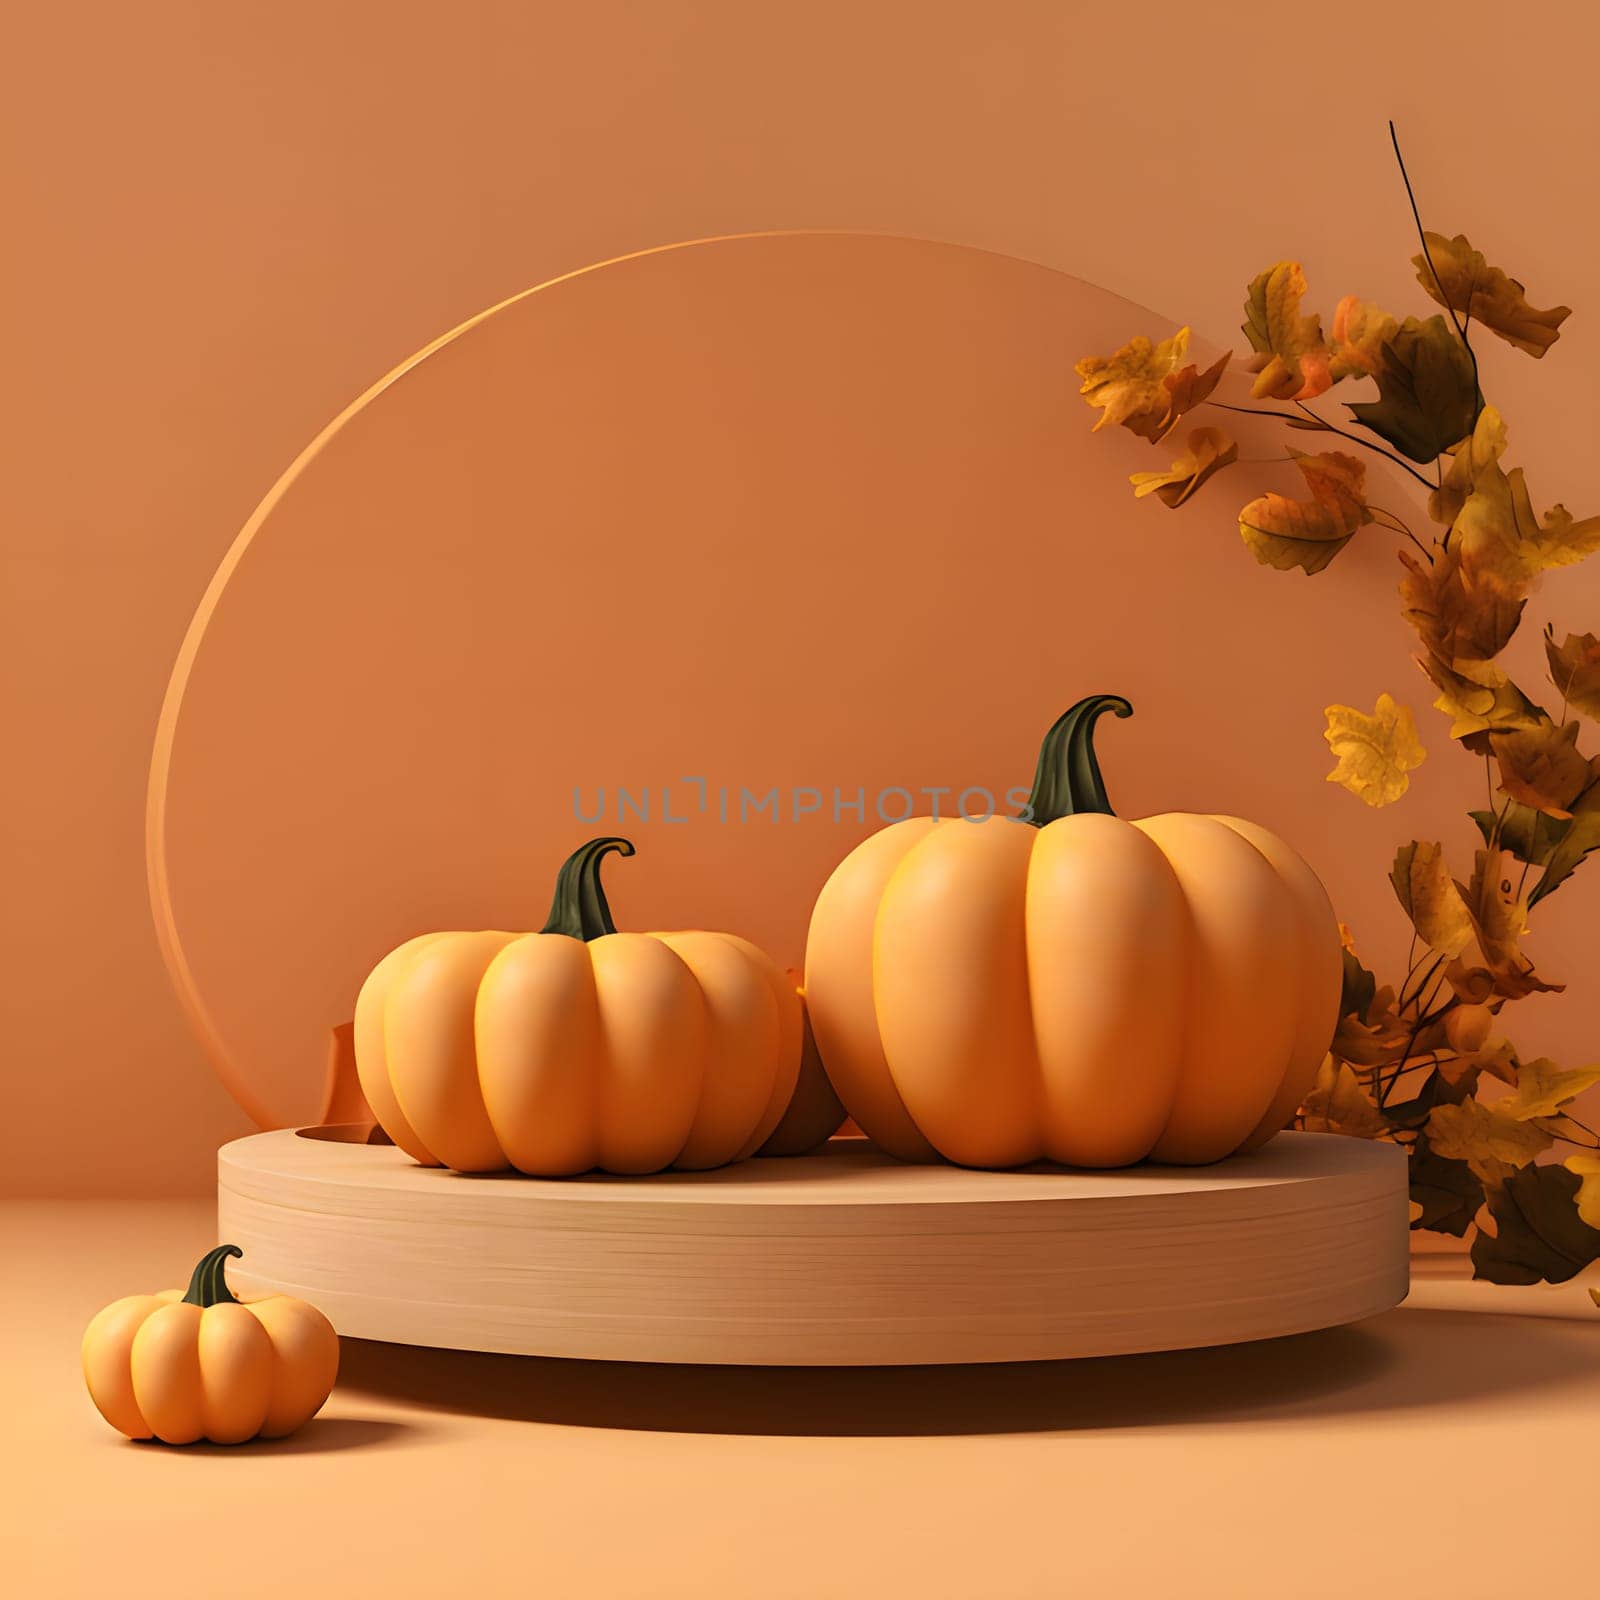 Elegant scenery with pumpkins and autumn leaves. Orange color. Pumpkin as a dish of thanksgiving for the harvest.